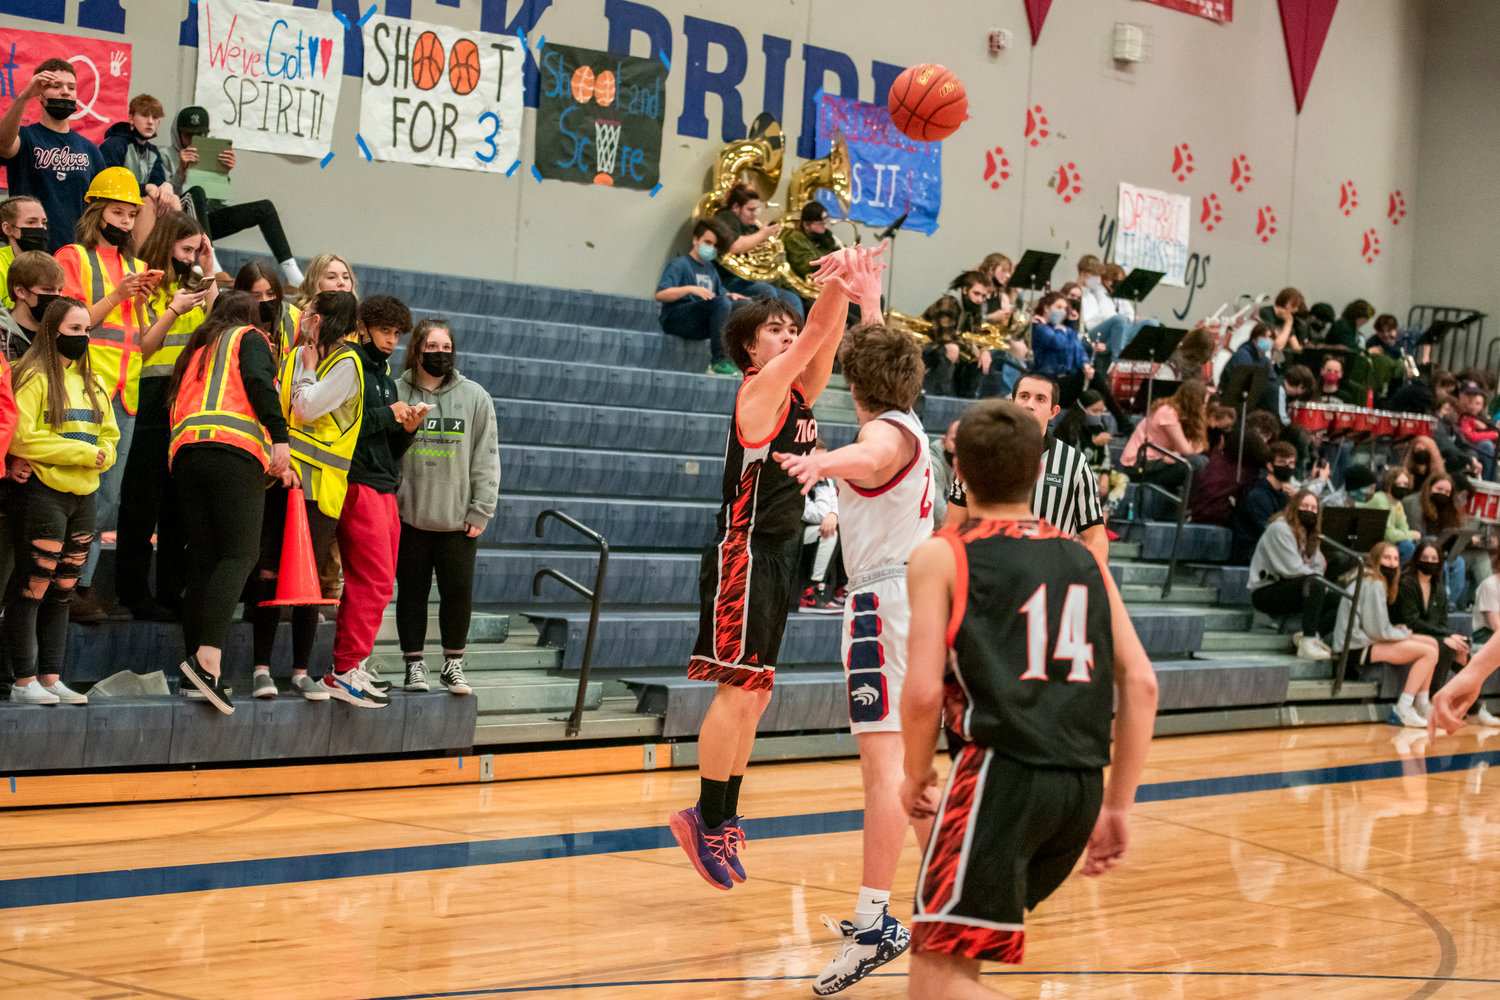 Centralia’s Brandon Yeung (10) looks to shoot during a game at Black Hills High School Tuesday night.